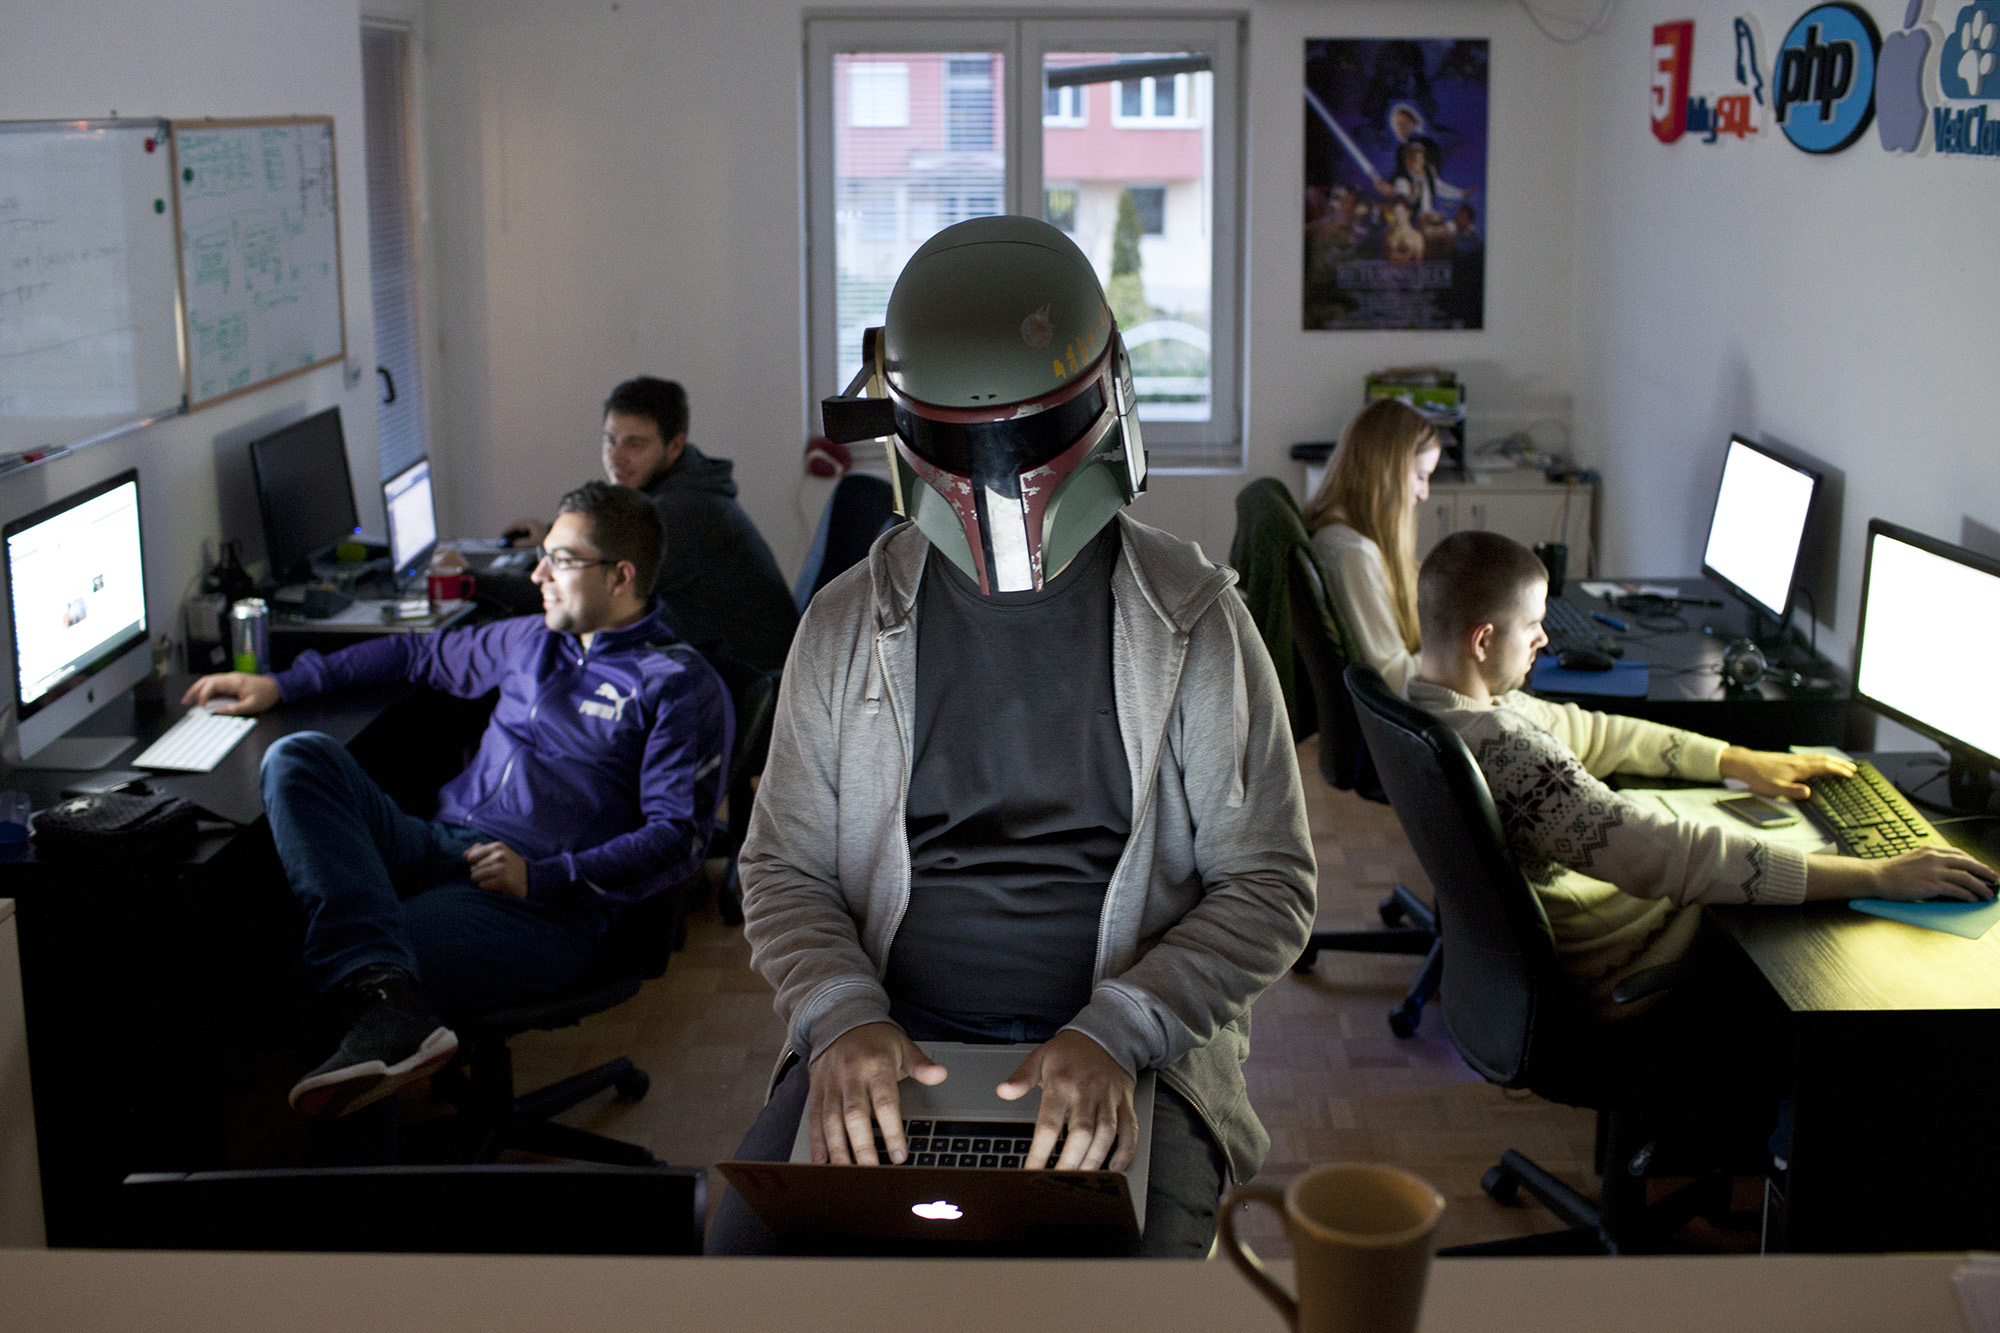 City of Nis, Serbia, 12/04/2014 Ivan Vesic, the co-founder of VetCloud, with the mask of Darth Vader, seen in the office of VetCloud, working together with his team (Stefan Milovanovic, Mirza Sejdinovic, Mia Petkovic, Nikola Zivkovic). VetCloud is a small Startup company established by Ivan Vesic and Mirza Sejdinovic in the city of Nish in southern Serbia. The startup is oriented towards making an online cloud  platform that provides services for veterinarians. Photo by MARKO RISOVIC for The International New York Times